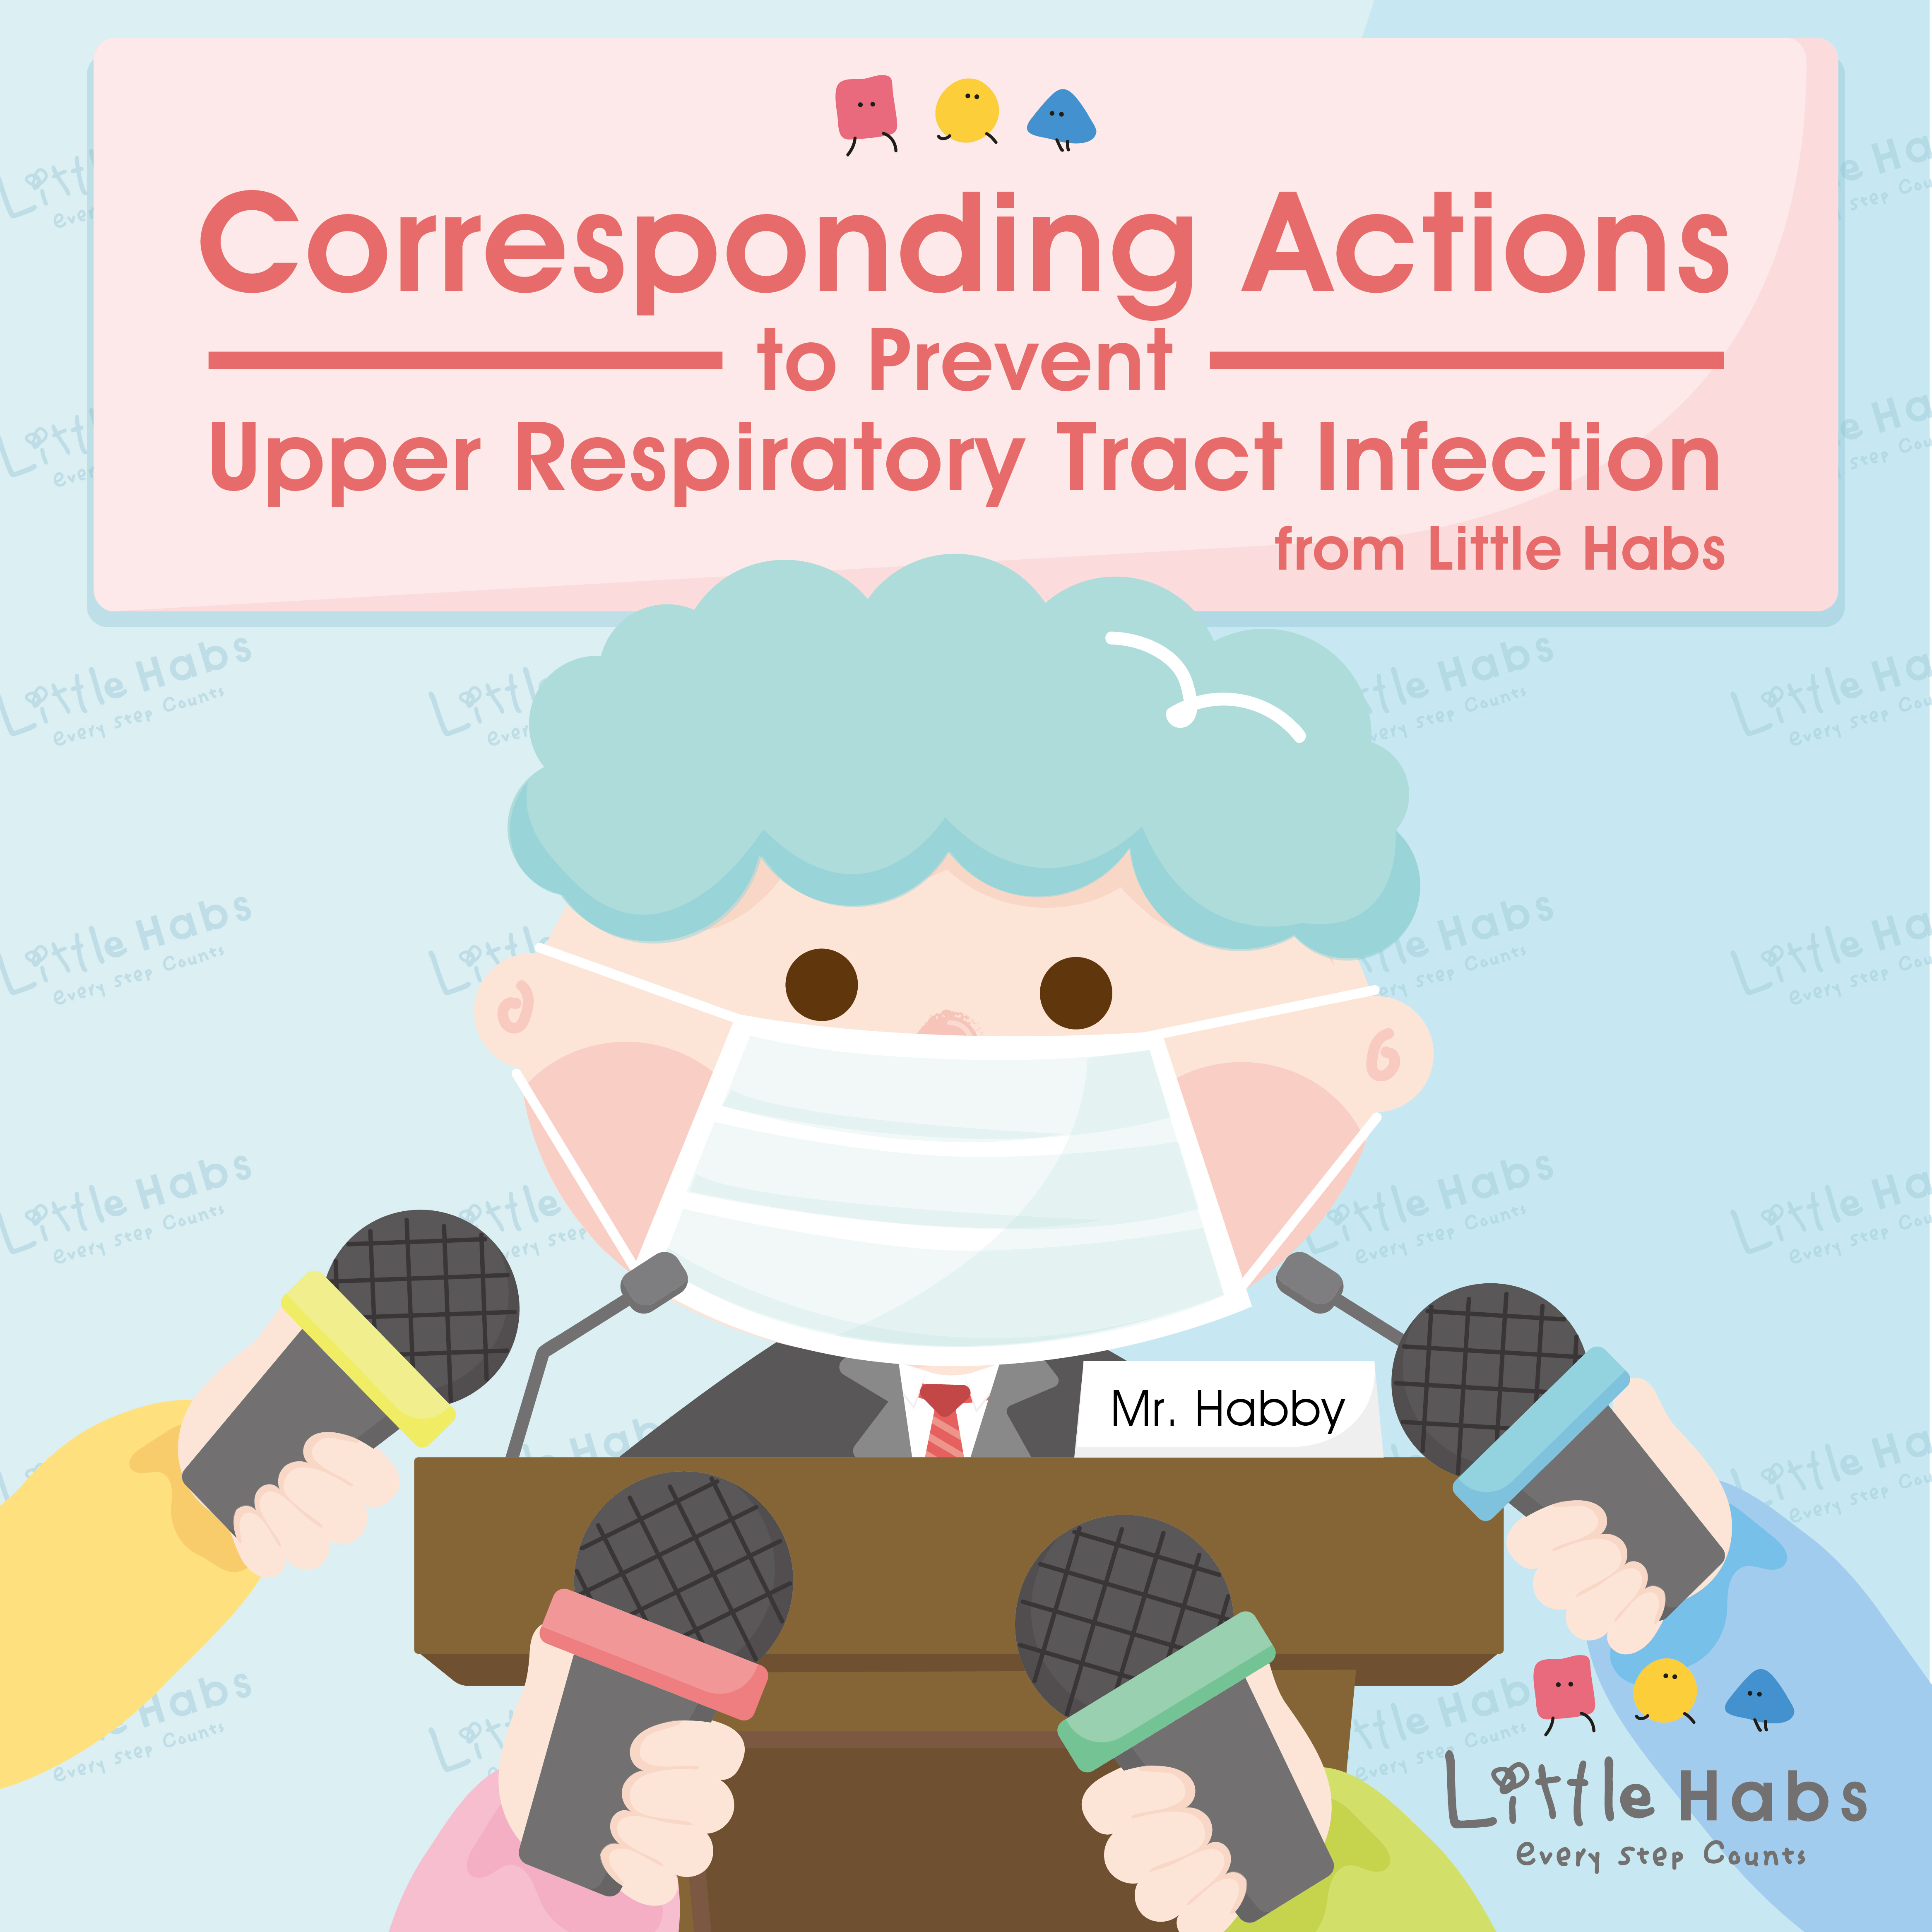 Corresponding Actions to Prevent Upper Respiratory Tract Infection